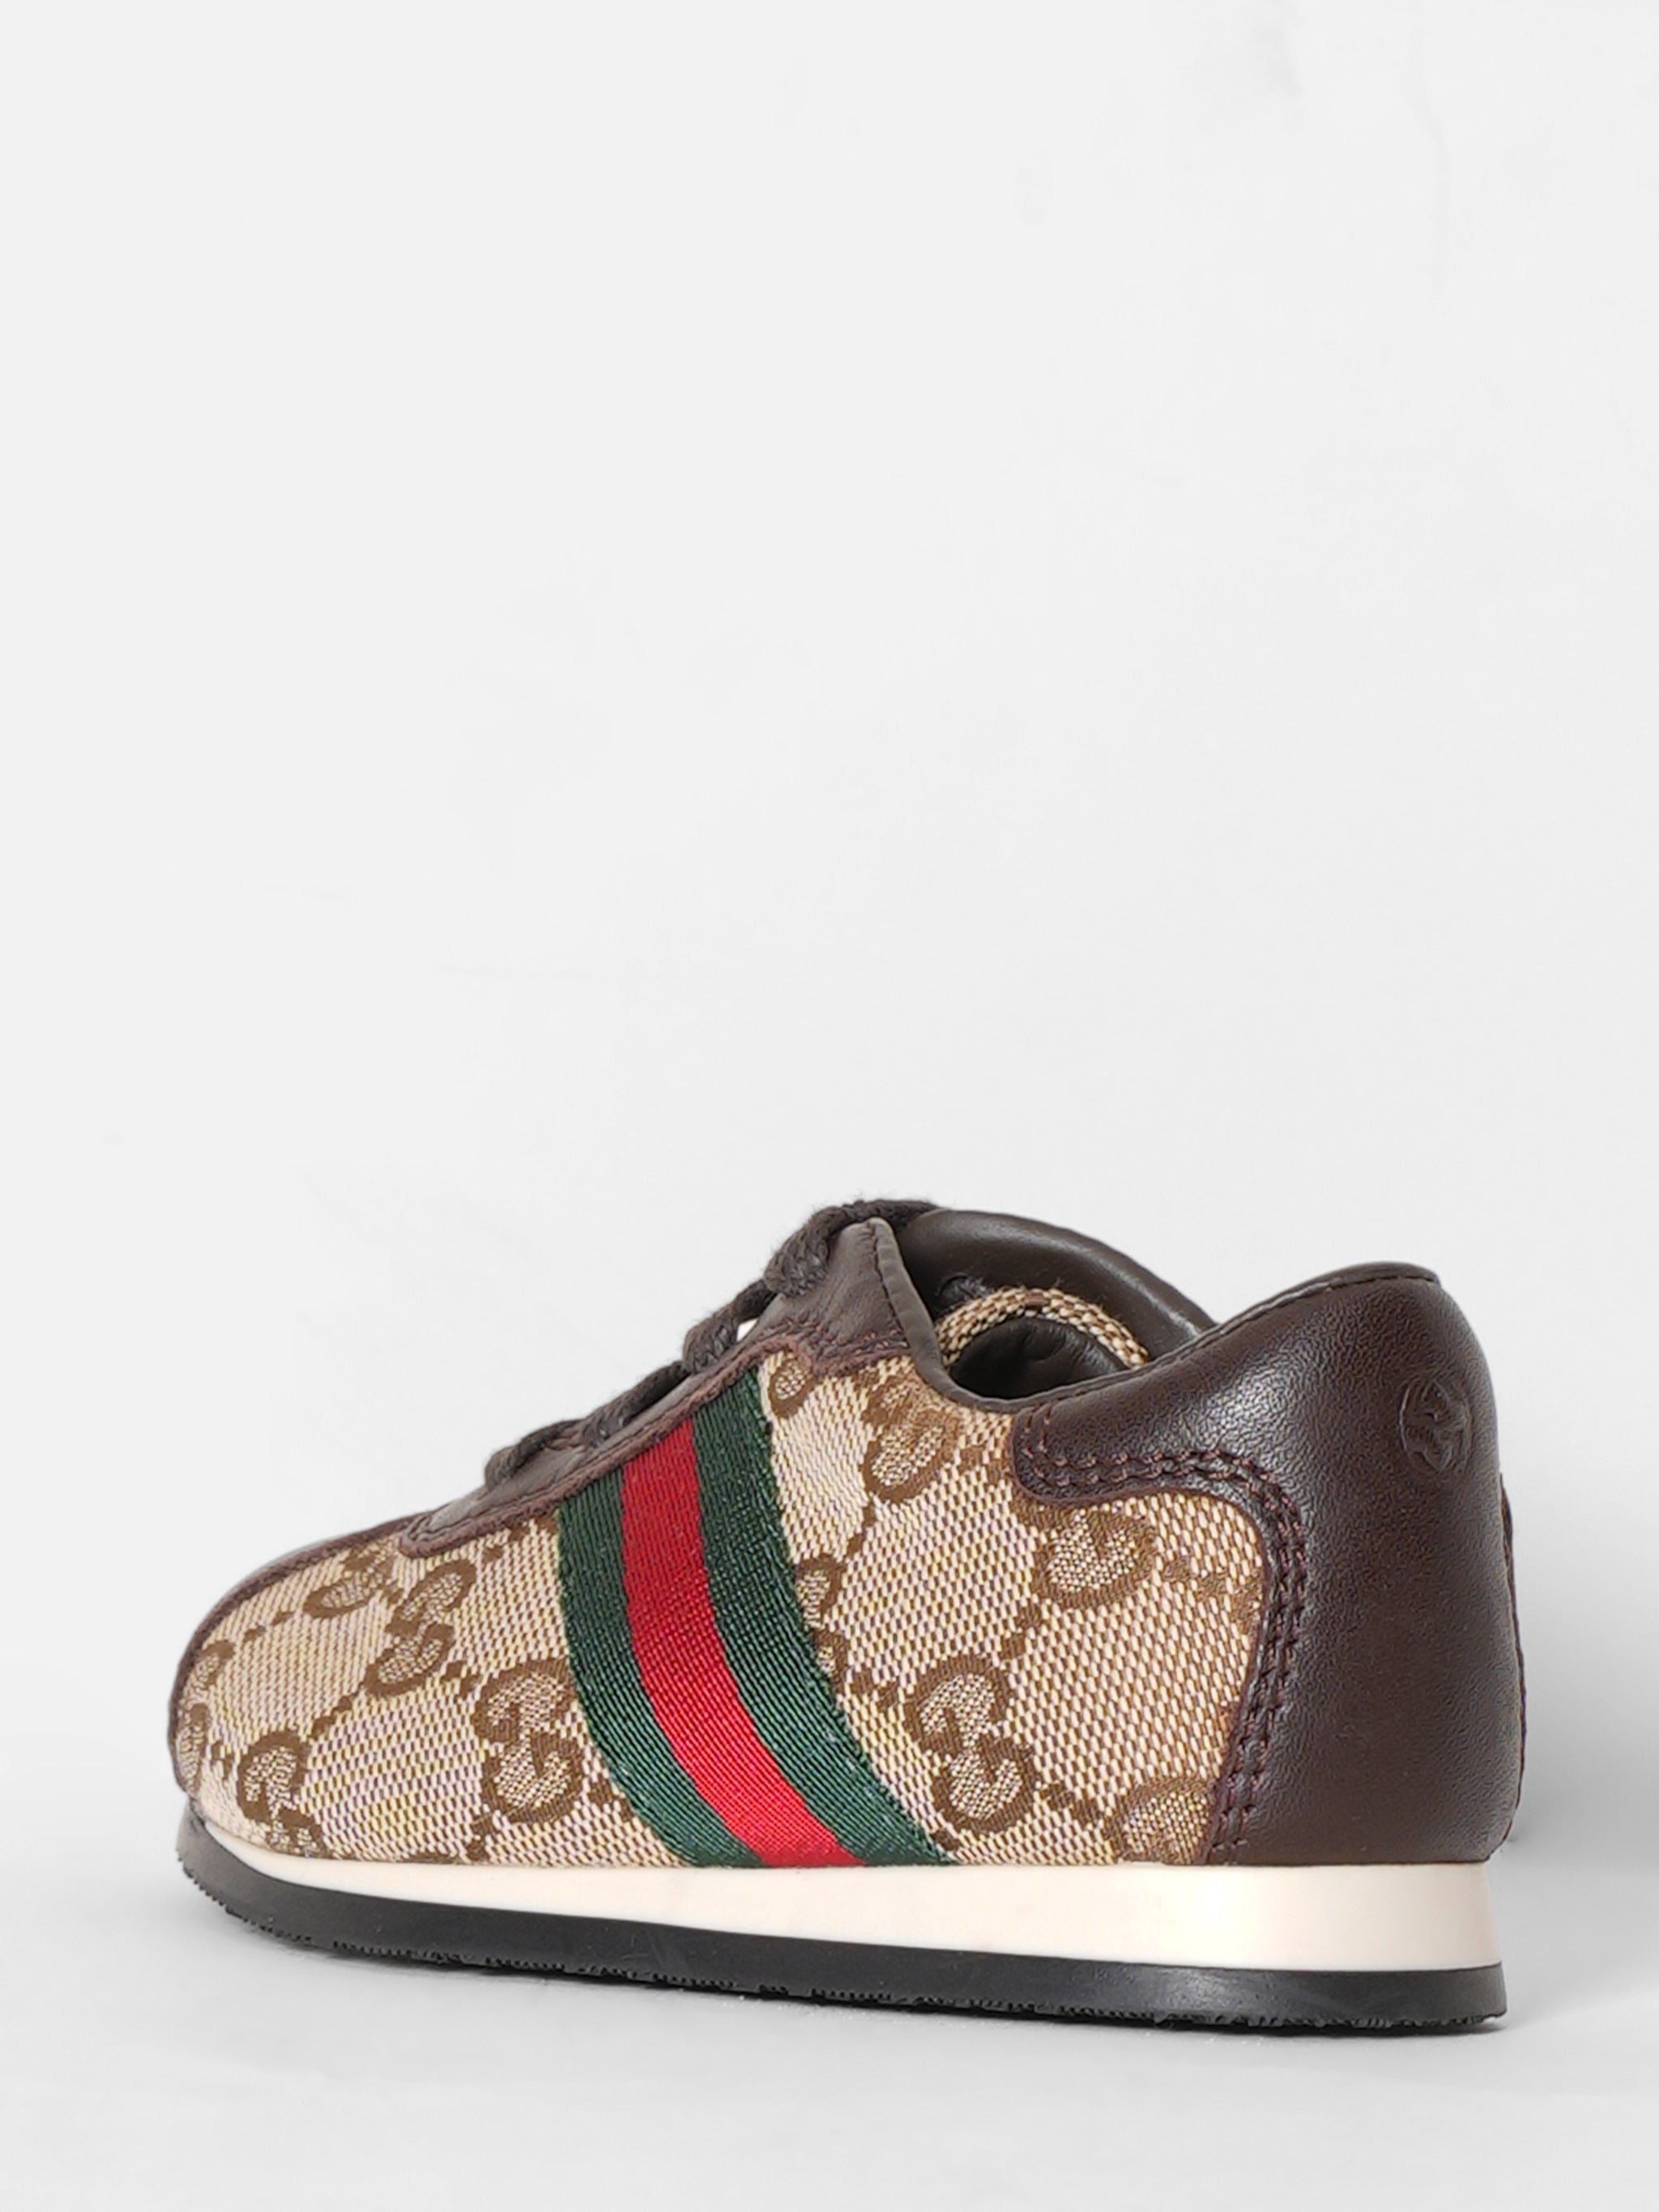 Gucci Kids GG Canvas Laceup Sneakers